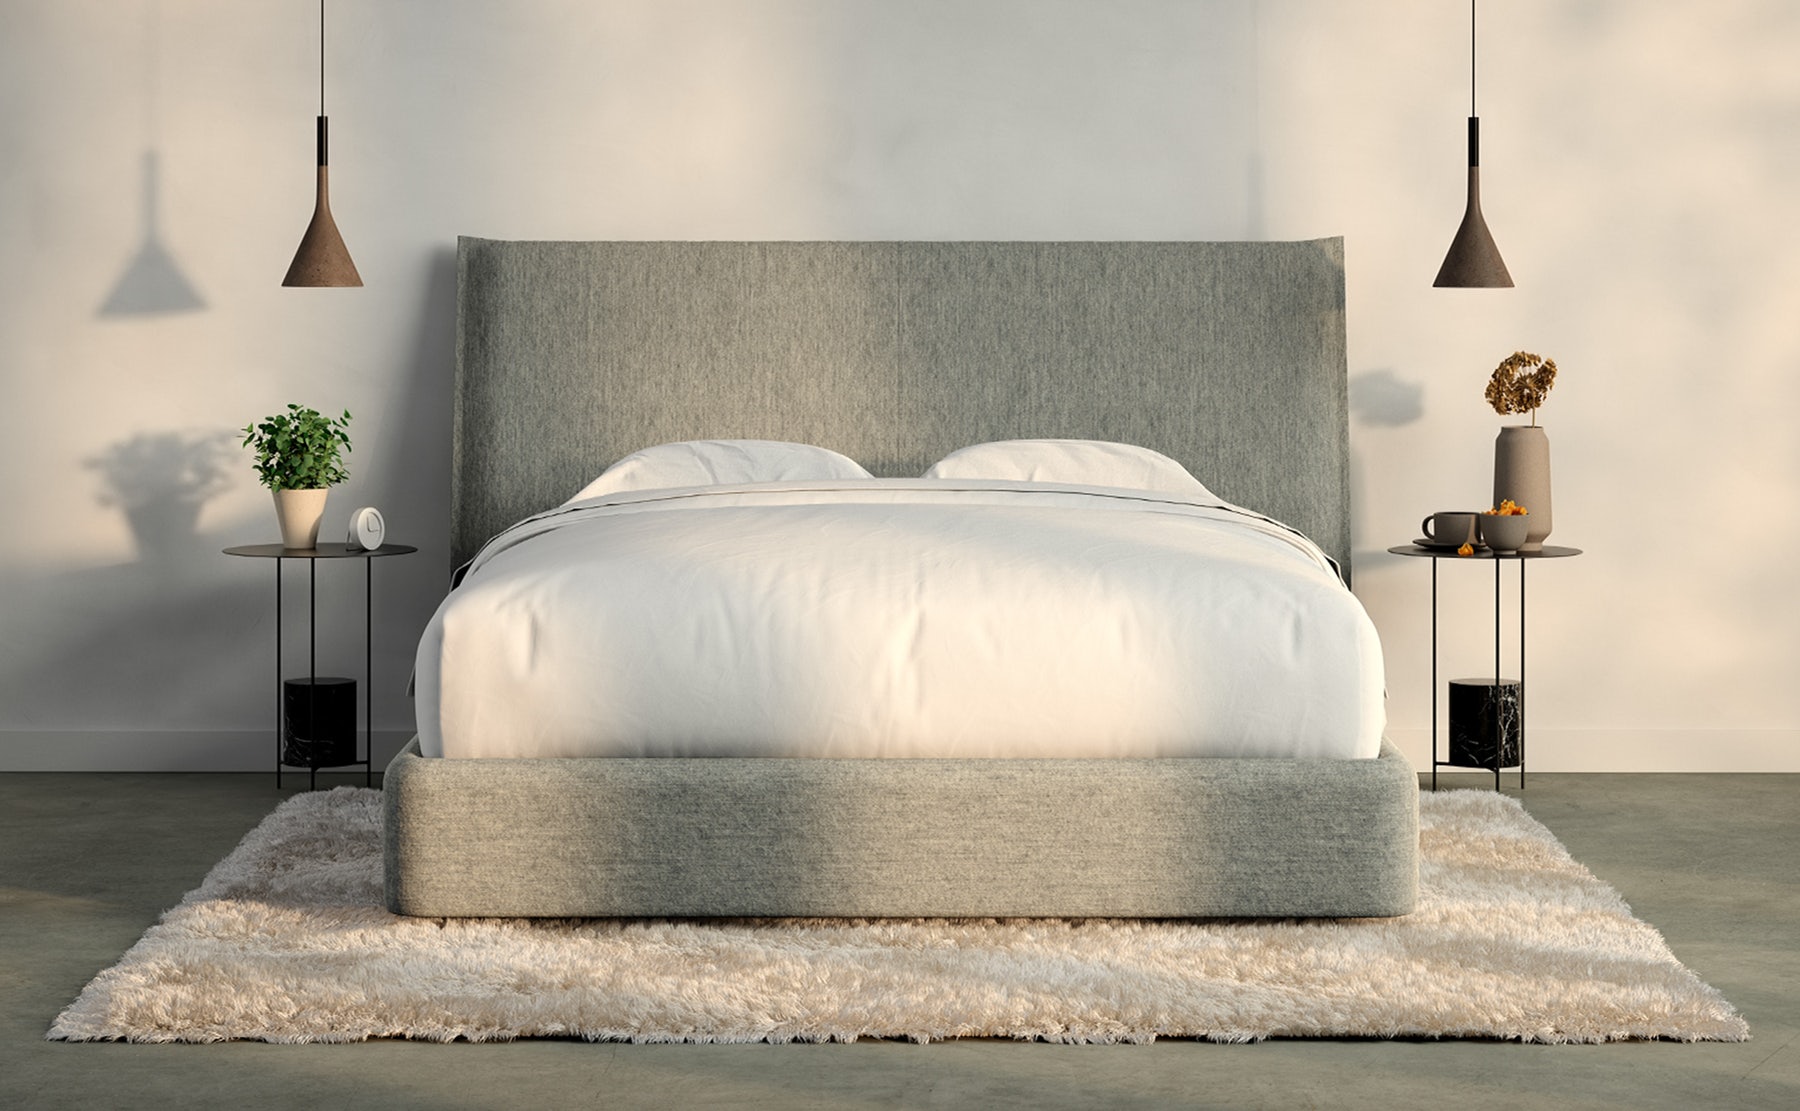 Mattress Sizes And Bed Dimensions Guide, Is There A Bed Wider Than King